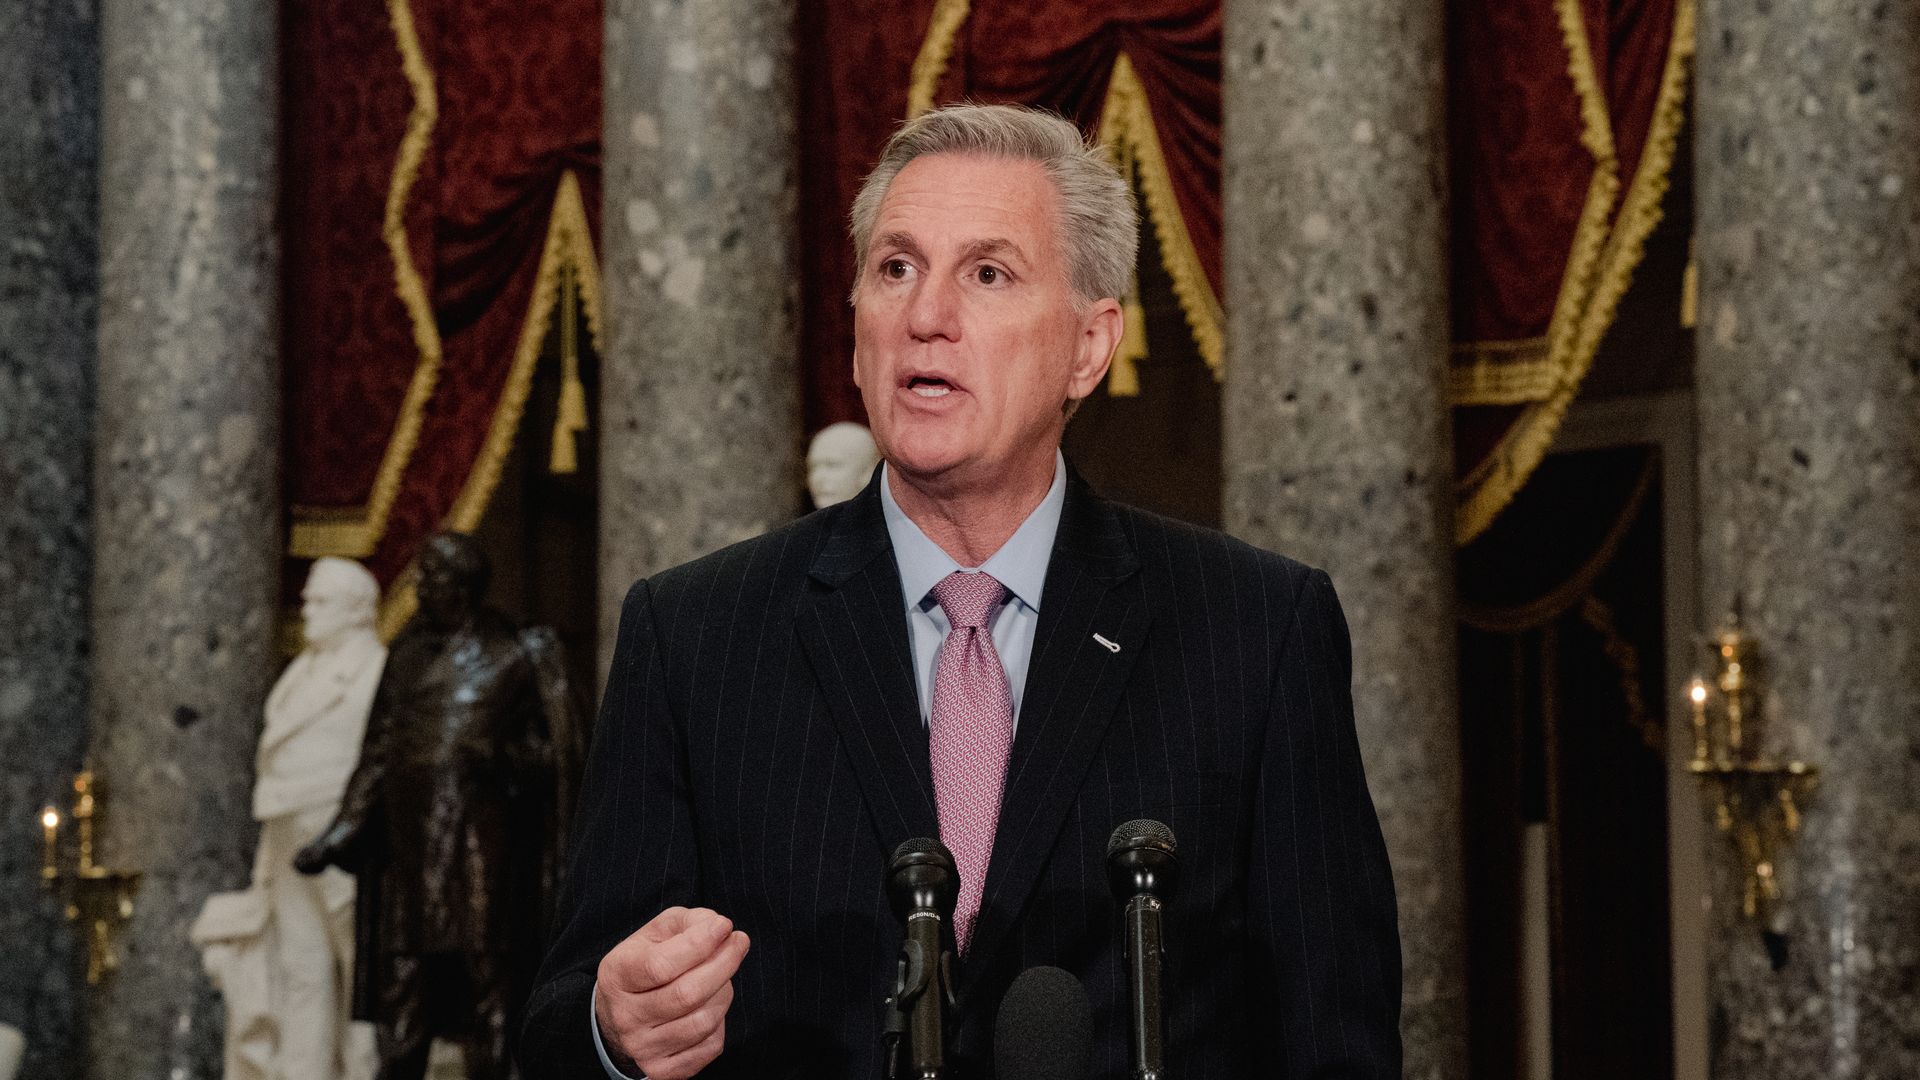 Photo of Kevin McCarthy speaking while gesturing with his right hand